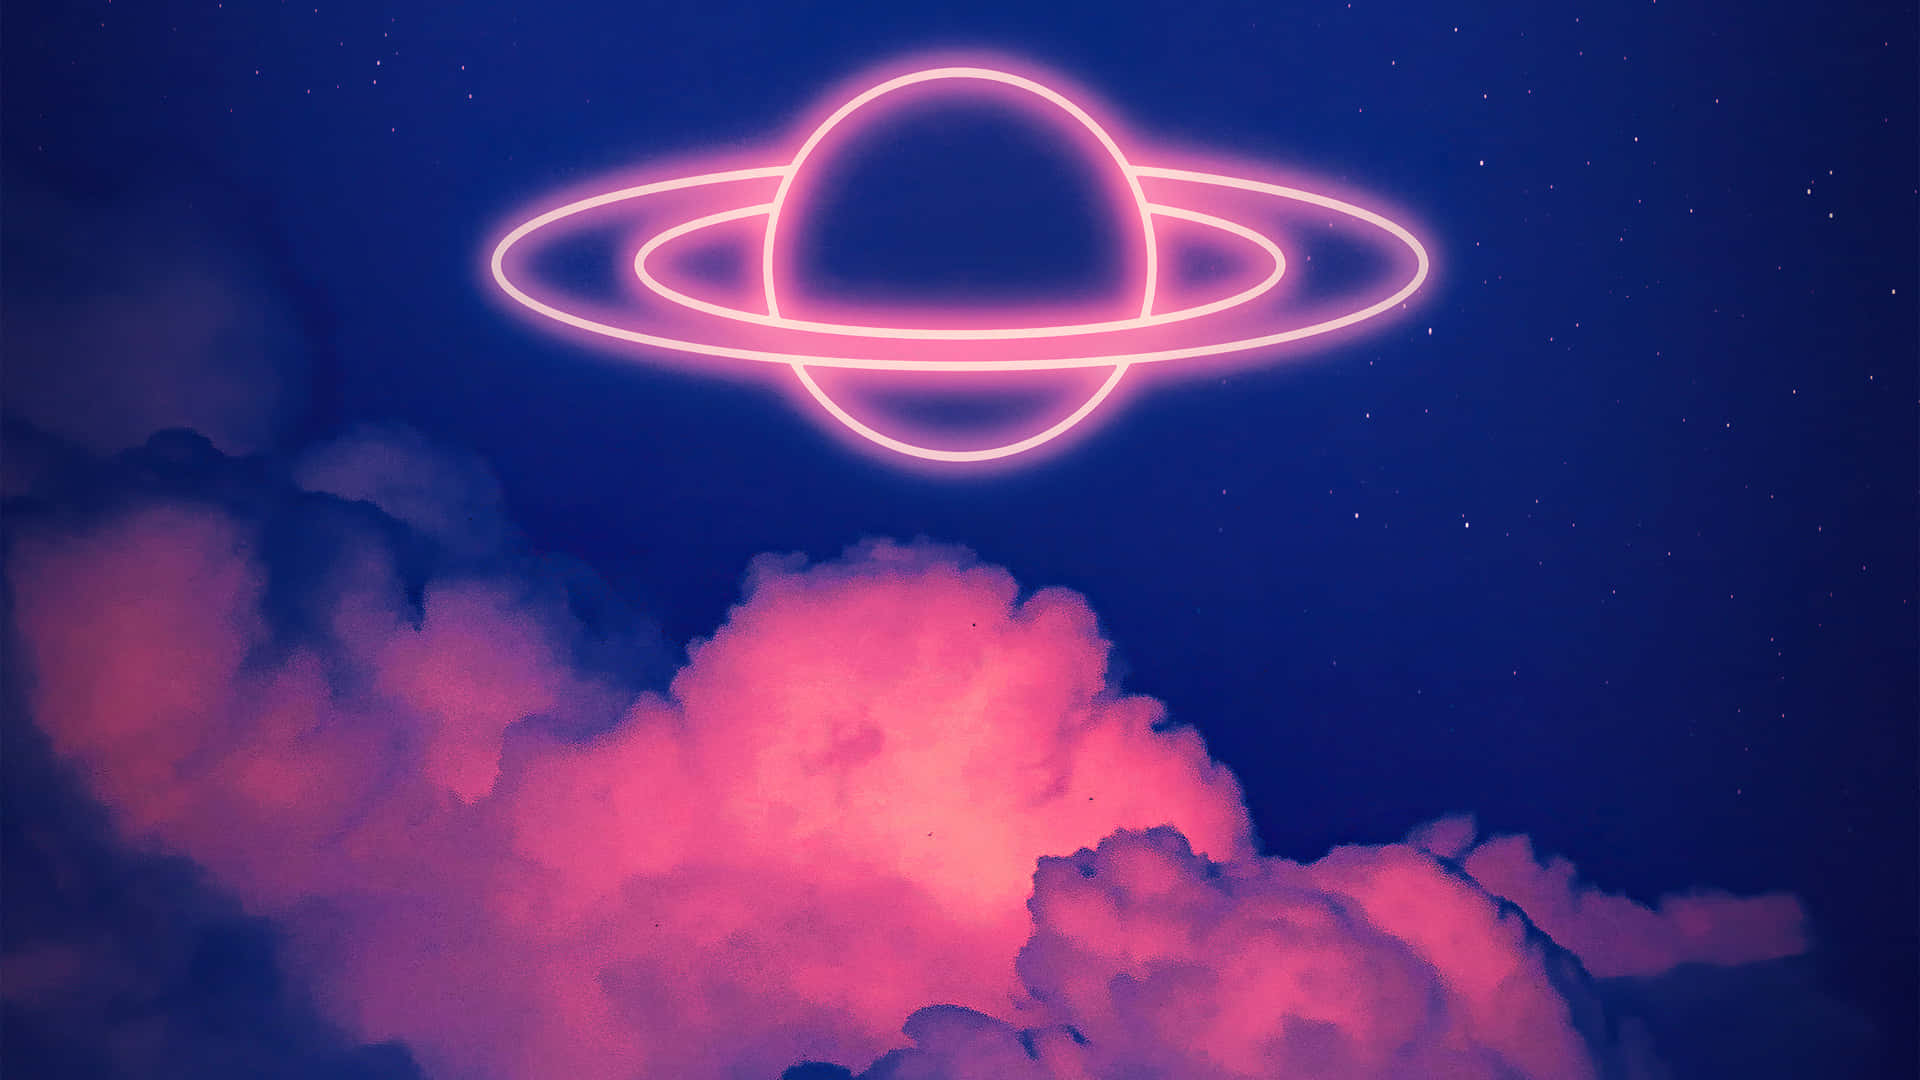 Light Up The Night Sky with Blue and Pink Aesthetic Neon Wallpaper